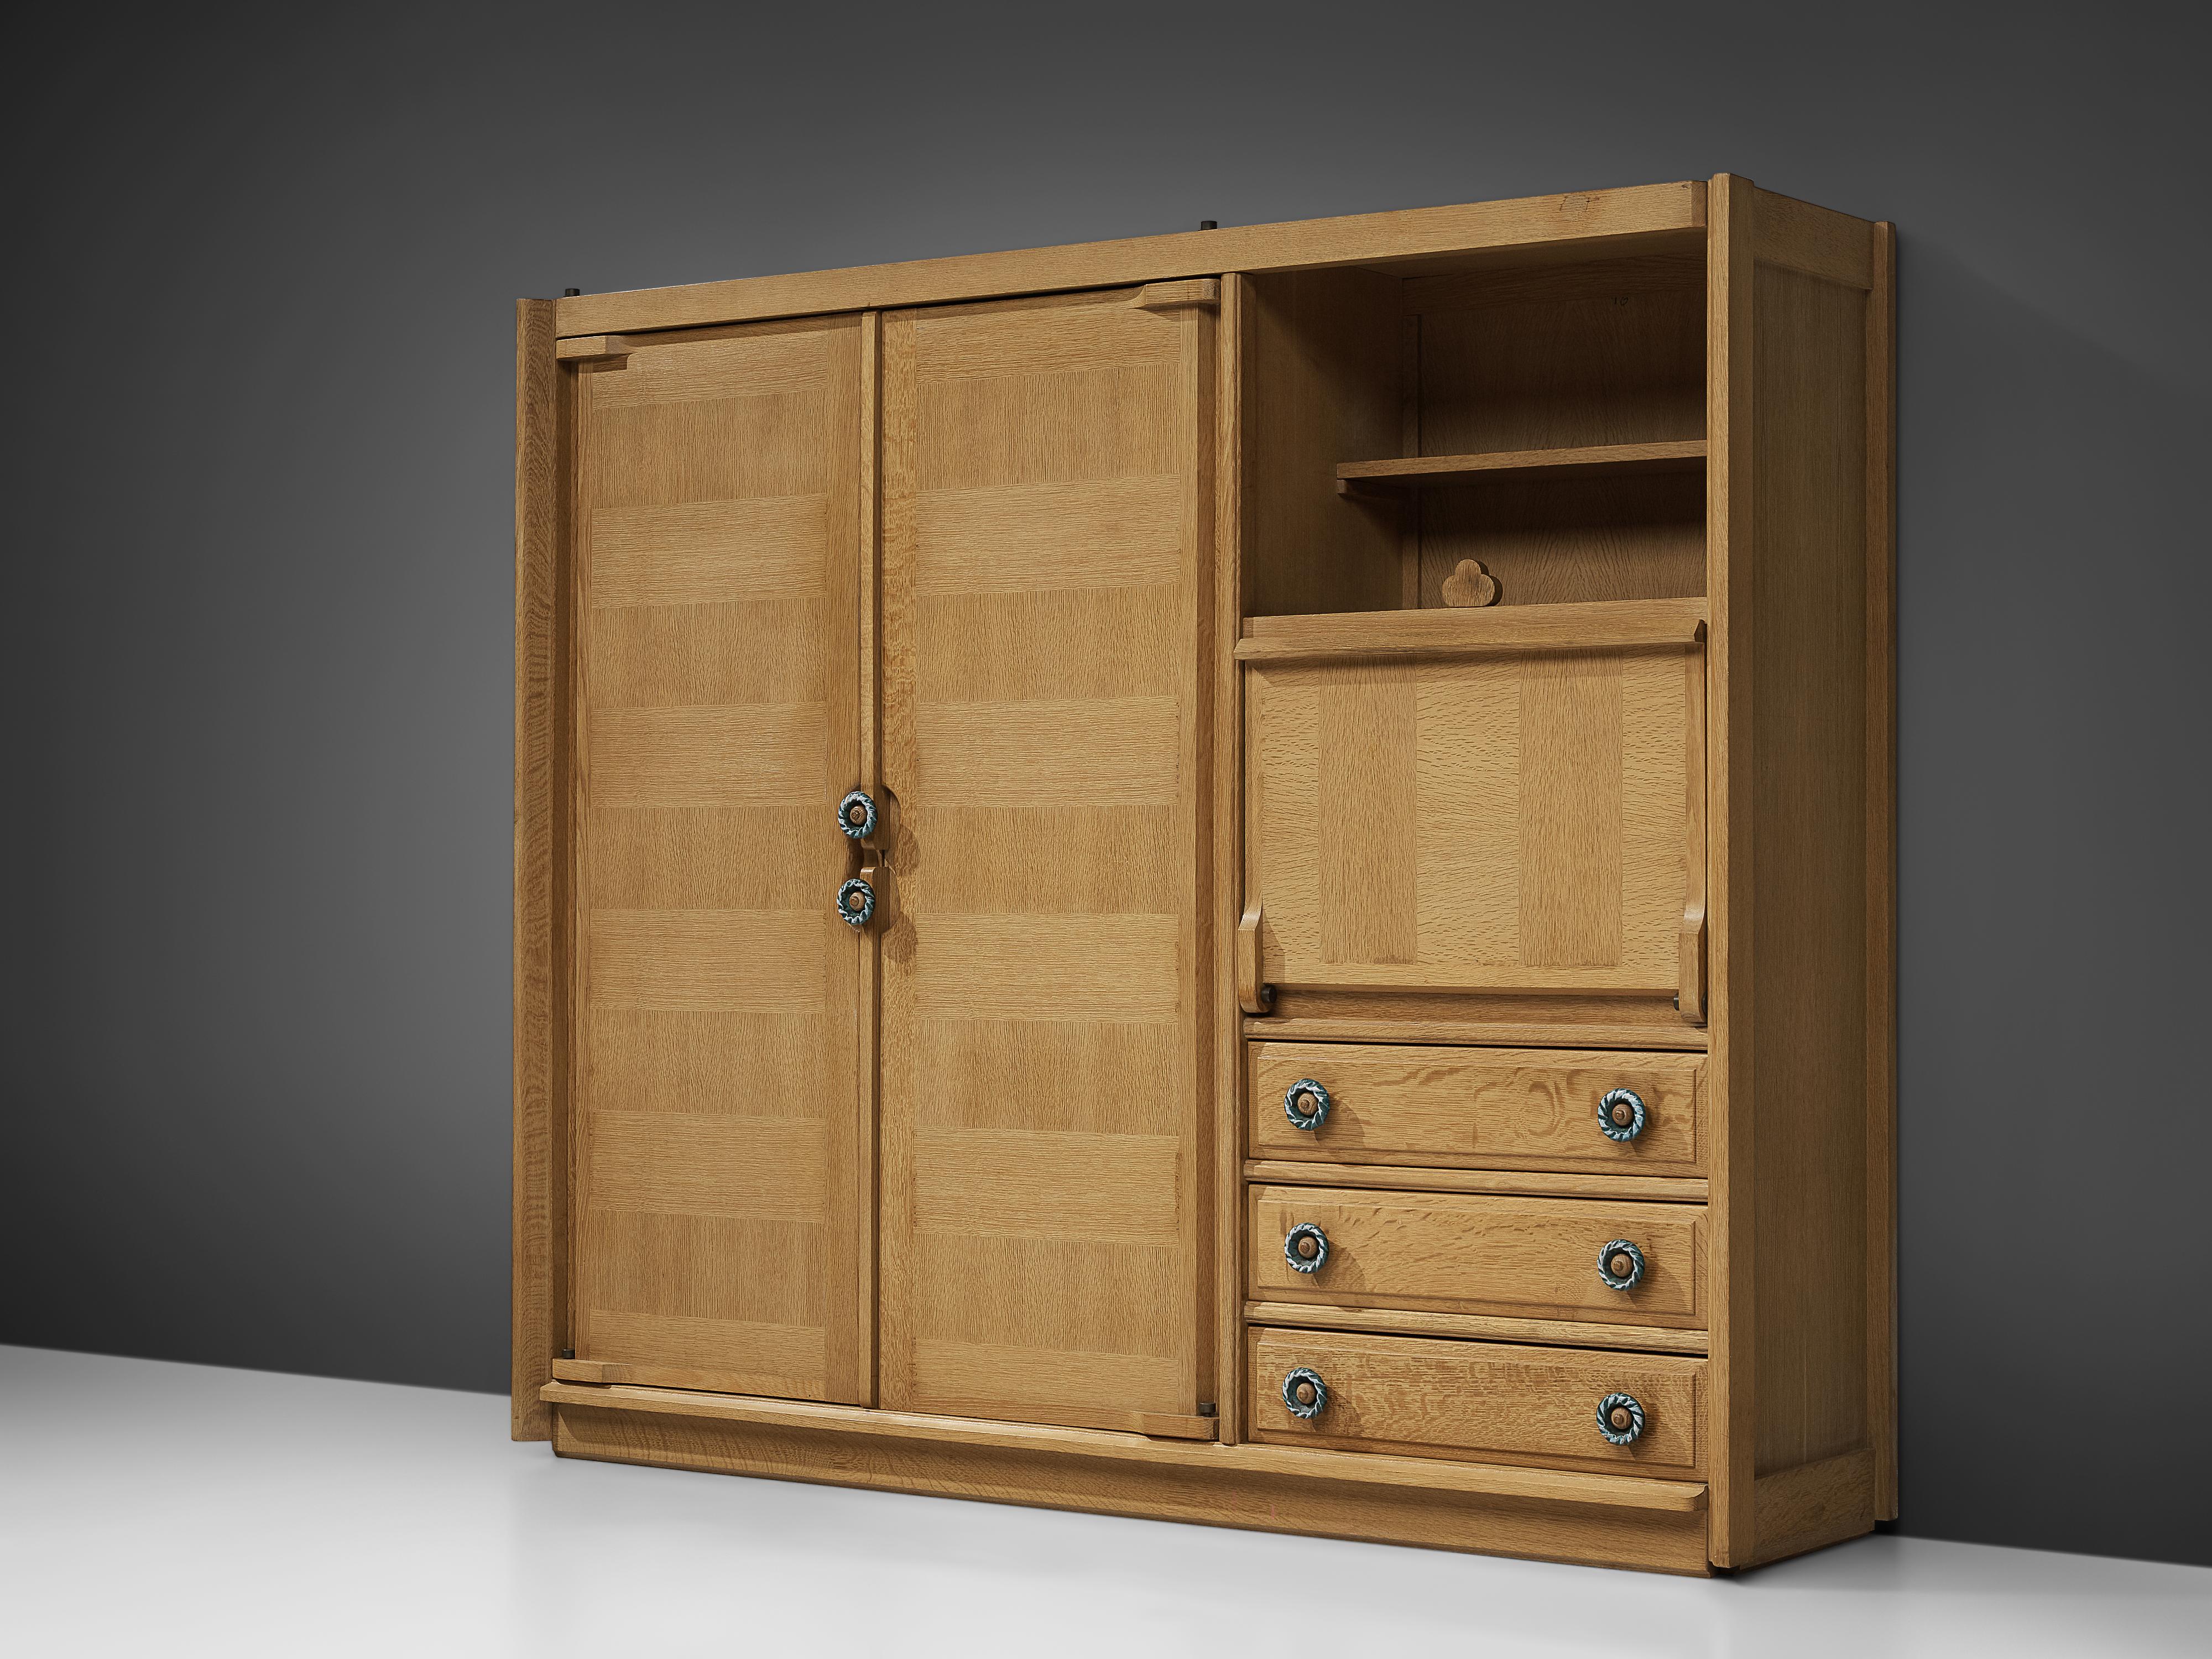 Guillerme and Chambron, cupboard, oak, ceramic, France, 1960s 

With differently designed compartments this cupboard offers many versatile features. On the one side two large doors access an interior with shelves. Next to it are drawers and a dry